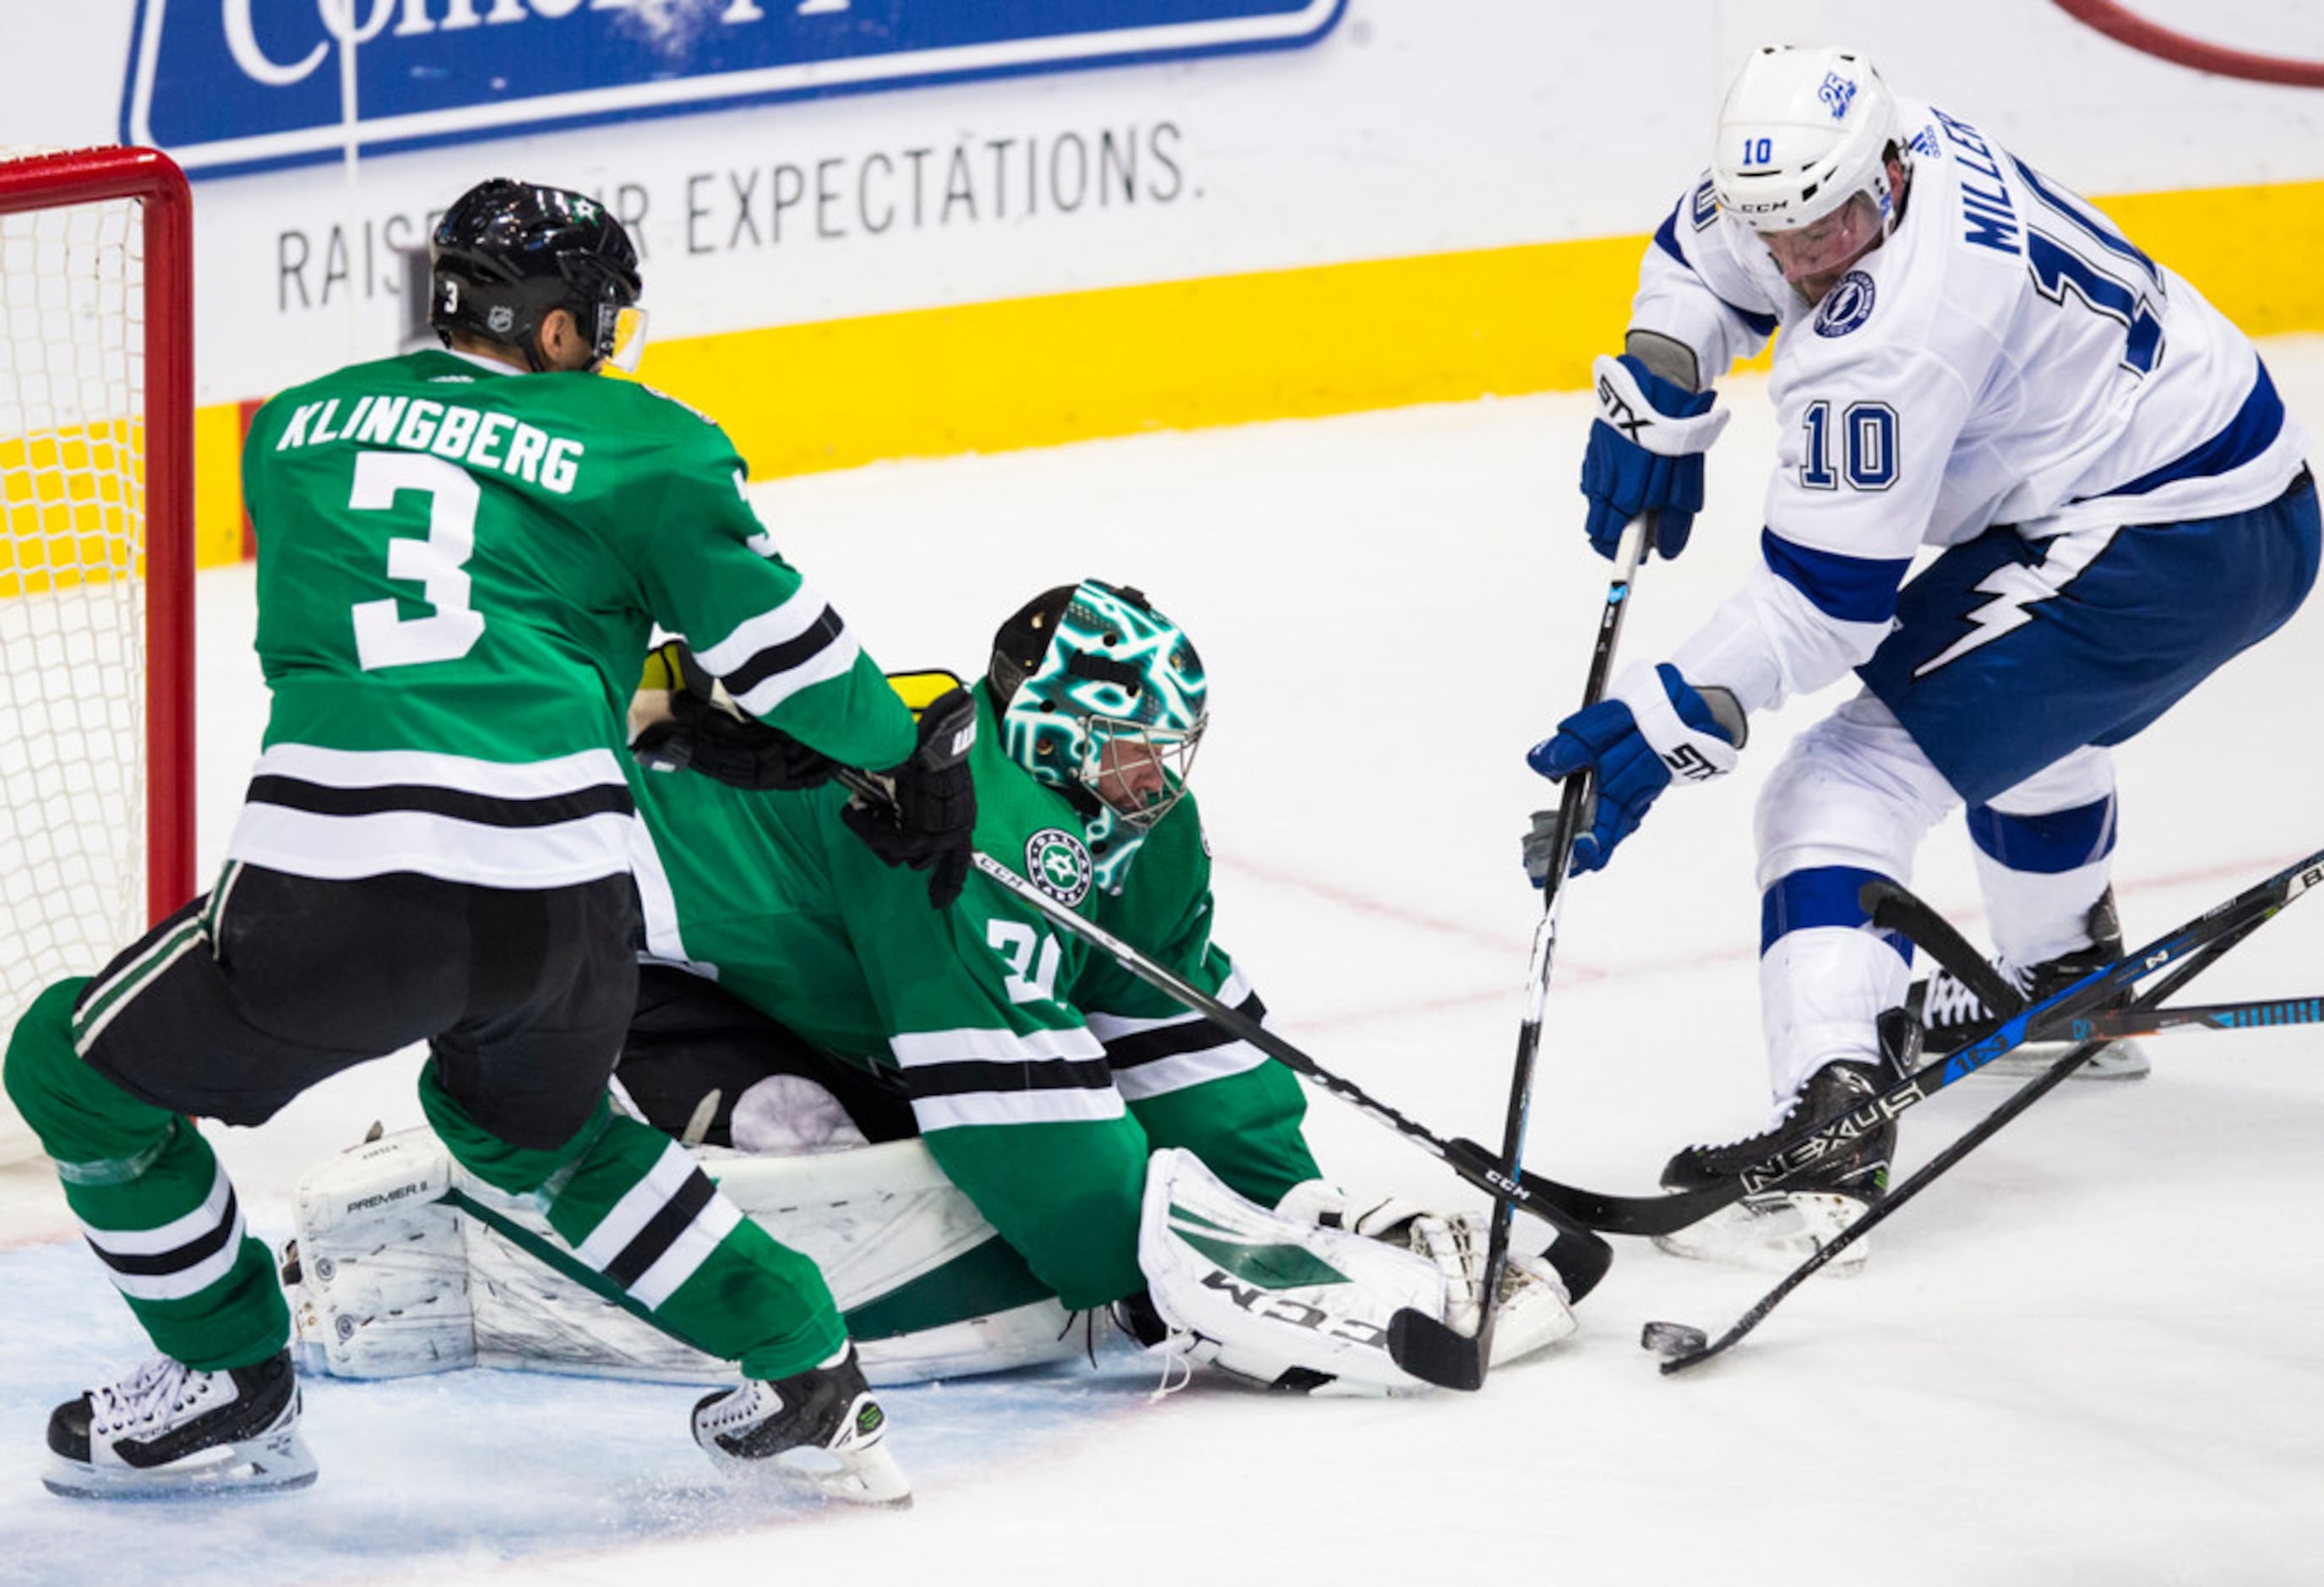 Here's hoping Ben Bishop gets the farewell he deserves in Tampa Bay